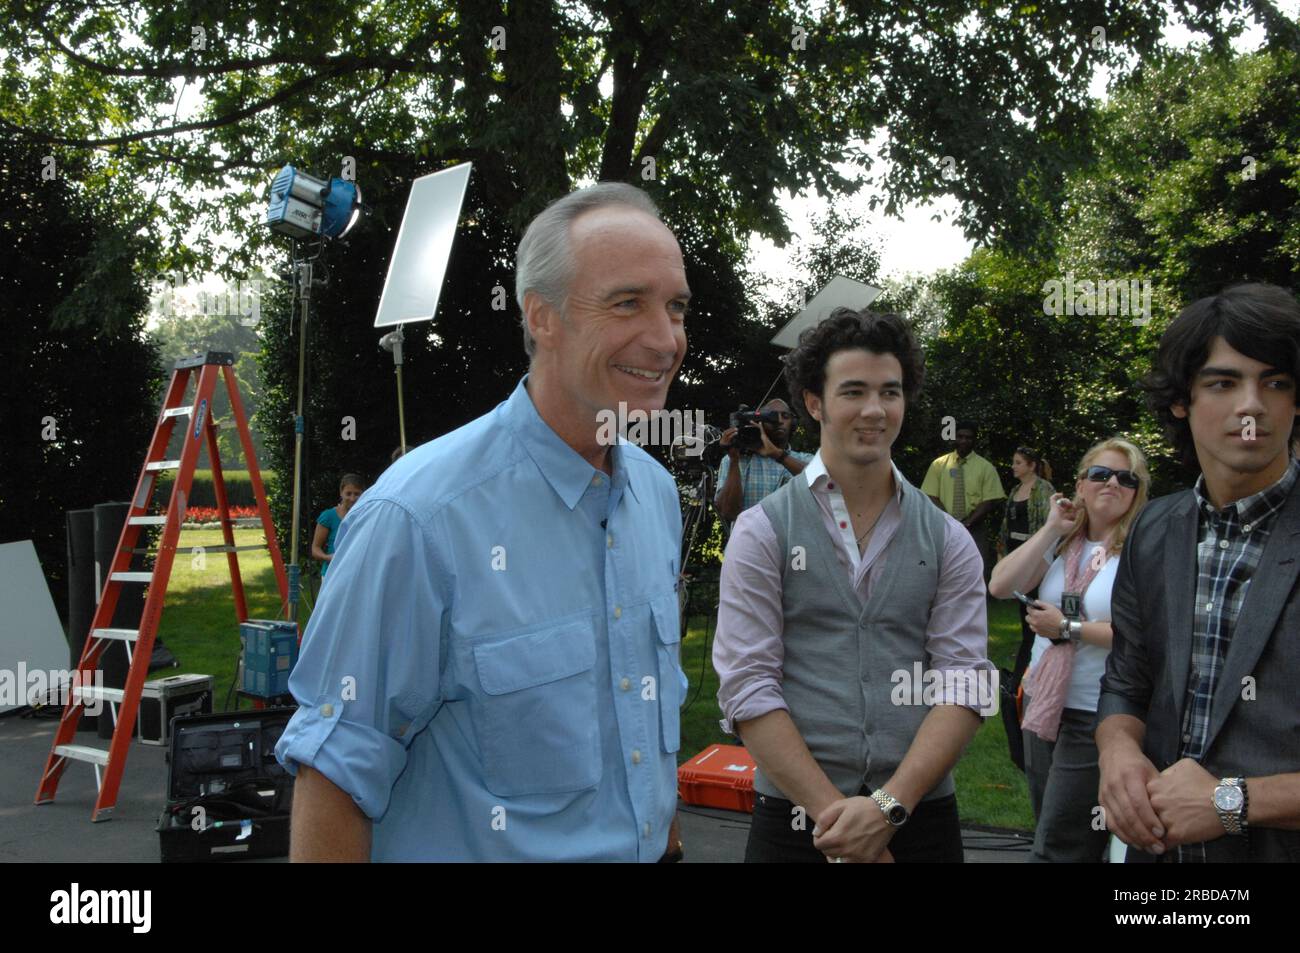 Secretary Dirk Kempthorne and aides joined by pop music stars, the Jonas Brothers--Kevin, Joe, and Nick--for work on Public Service Announcement (PSA) video, shot on the White House South Lawn, promoting the 'Get Outdoors, It's Yours' campaign Stock Photo